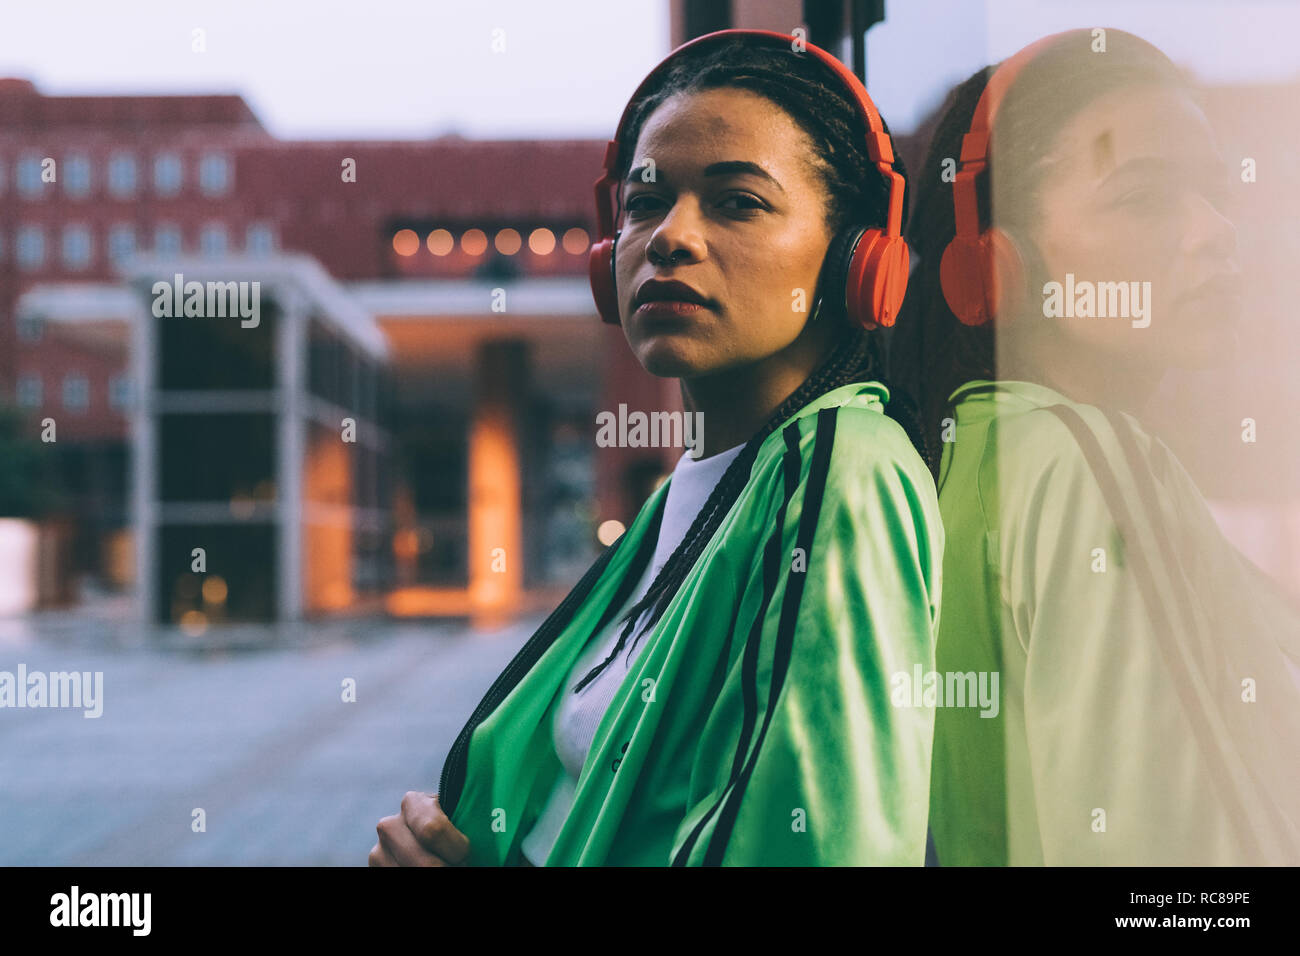 Woman with headphones leaning against glass window, Milan, Italy Stock Photo